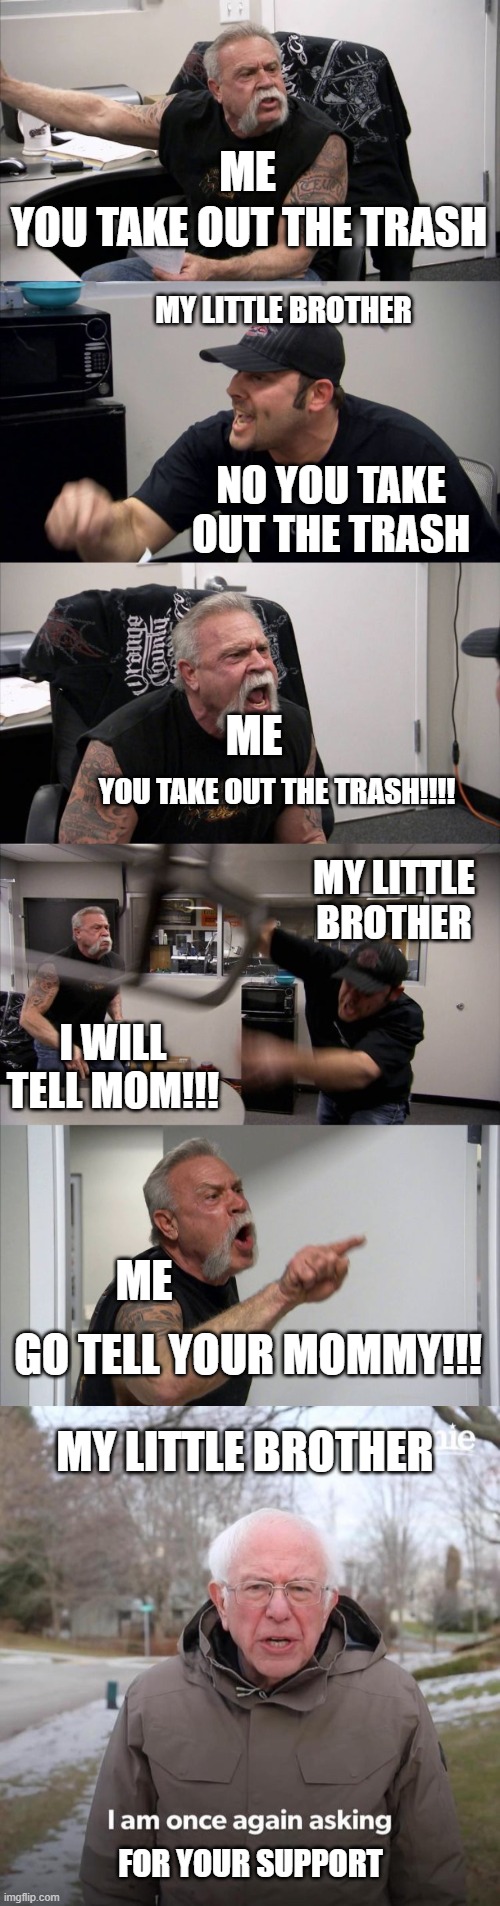 Anyone Relate ? | ME; YOU TAKE OUT THE TRASH; MY LITTLE BROTHER; NO YOU TAKE OUT THE TRASH; ME; YOU TAKE OUT THE TRASH!!!! MY LITTLE BROTHER; I WILL TELL MOM!!! ME; GO TELL YOUR MOMMY!!! MY LITTLE BROTHER; FOR YOUR SUPPORT | image tagged in memes,american chopper argument,bernie i am once again asking for your support,lol,meme,catematic | made w/ Imgflip meme maker